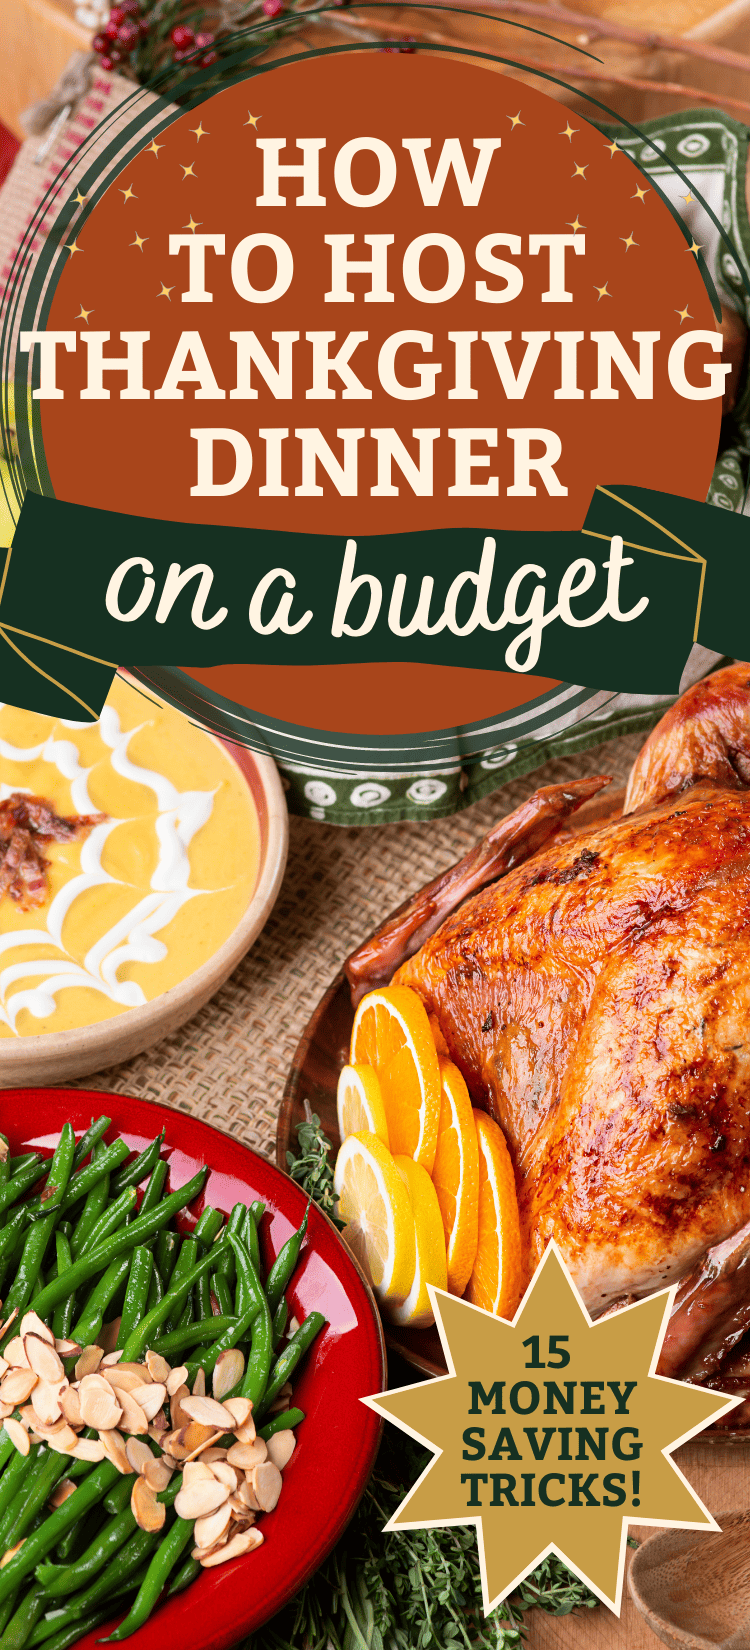 How to host Thanksgiving on a budget! 15 easy tips to save money on Thanksgiving dinner. Your guests will never know how little you spent! How to host thanksgiving like a boss, how to host thanksgiving for the first time, fun thanksgiving hosting ideas, thanksgiving dinner ideas hosting, thanksgiving hosting ideas entertaining, thanksgiving hosting ideas diy, hosting thanksgiving in a small space, thanksgiving checklist hosting, hosting thanksgiving dinner checklist, cheap thanksgiving dinner.